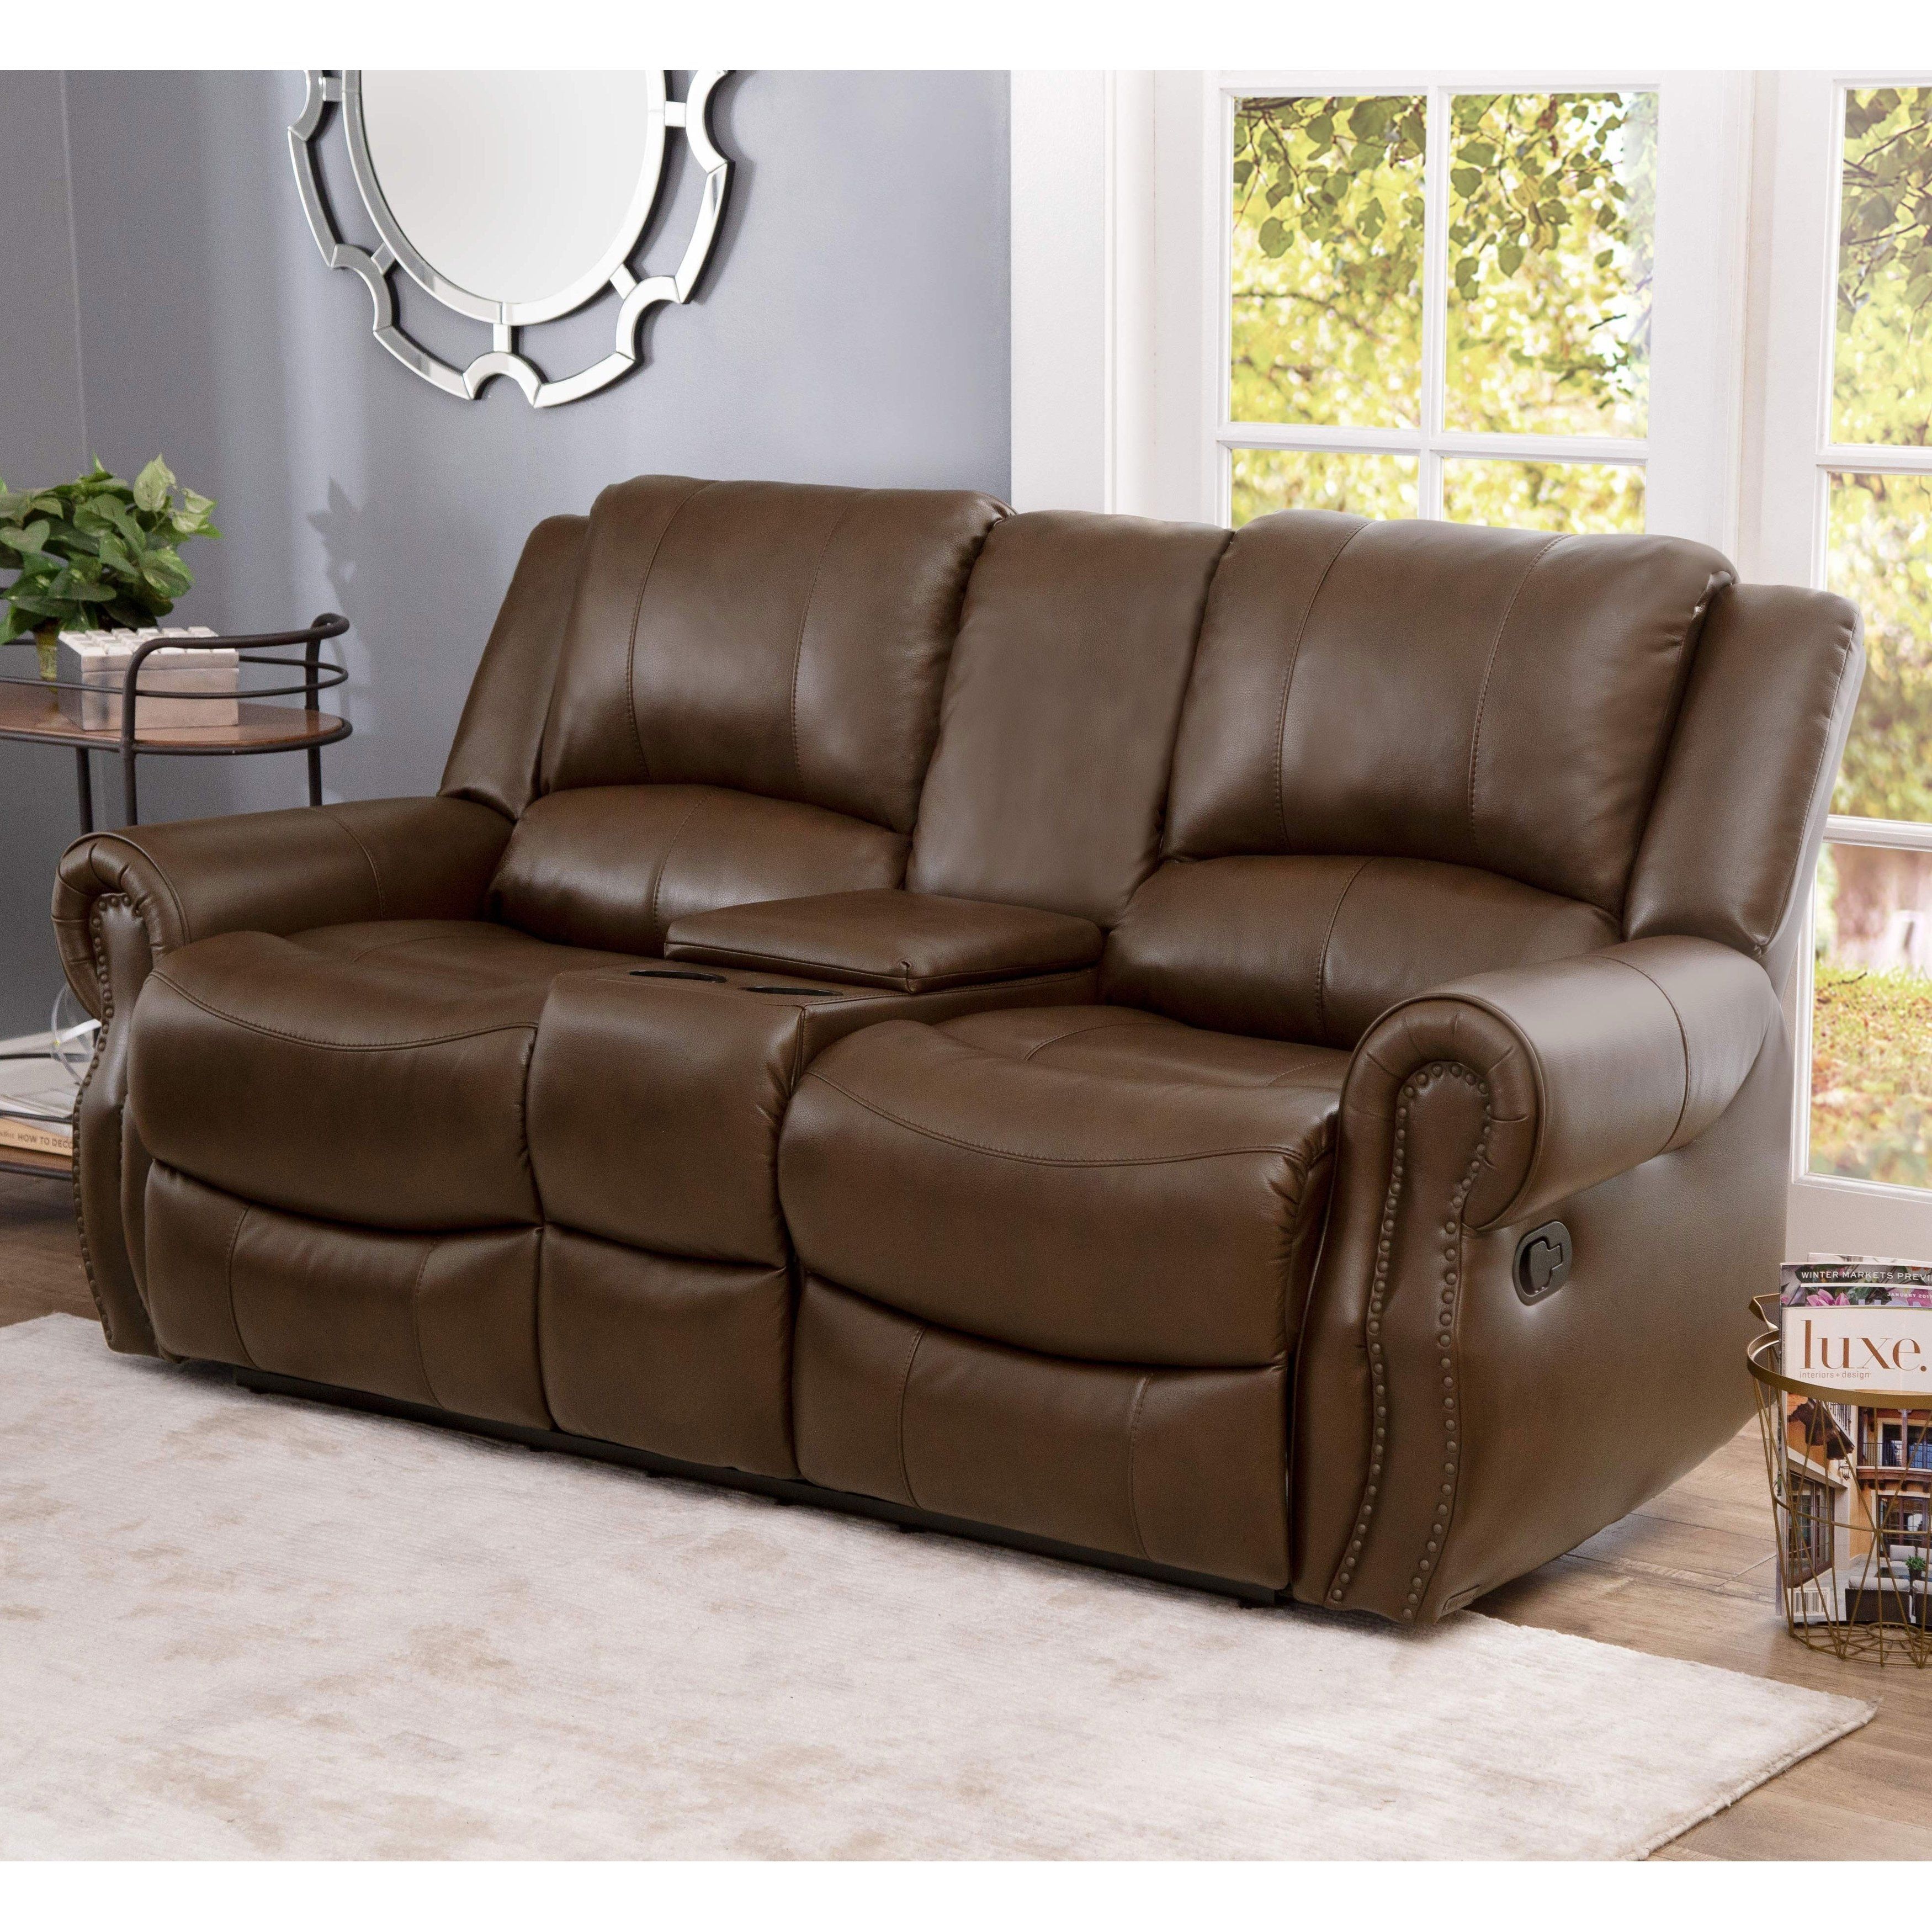 Shop Abbyson Calabasas Mesa Brown Leather Reclining Console Loveseat In Mesa Foam Oversized Sofa Chairs (View 24 of 25)